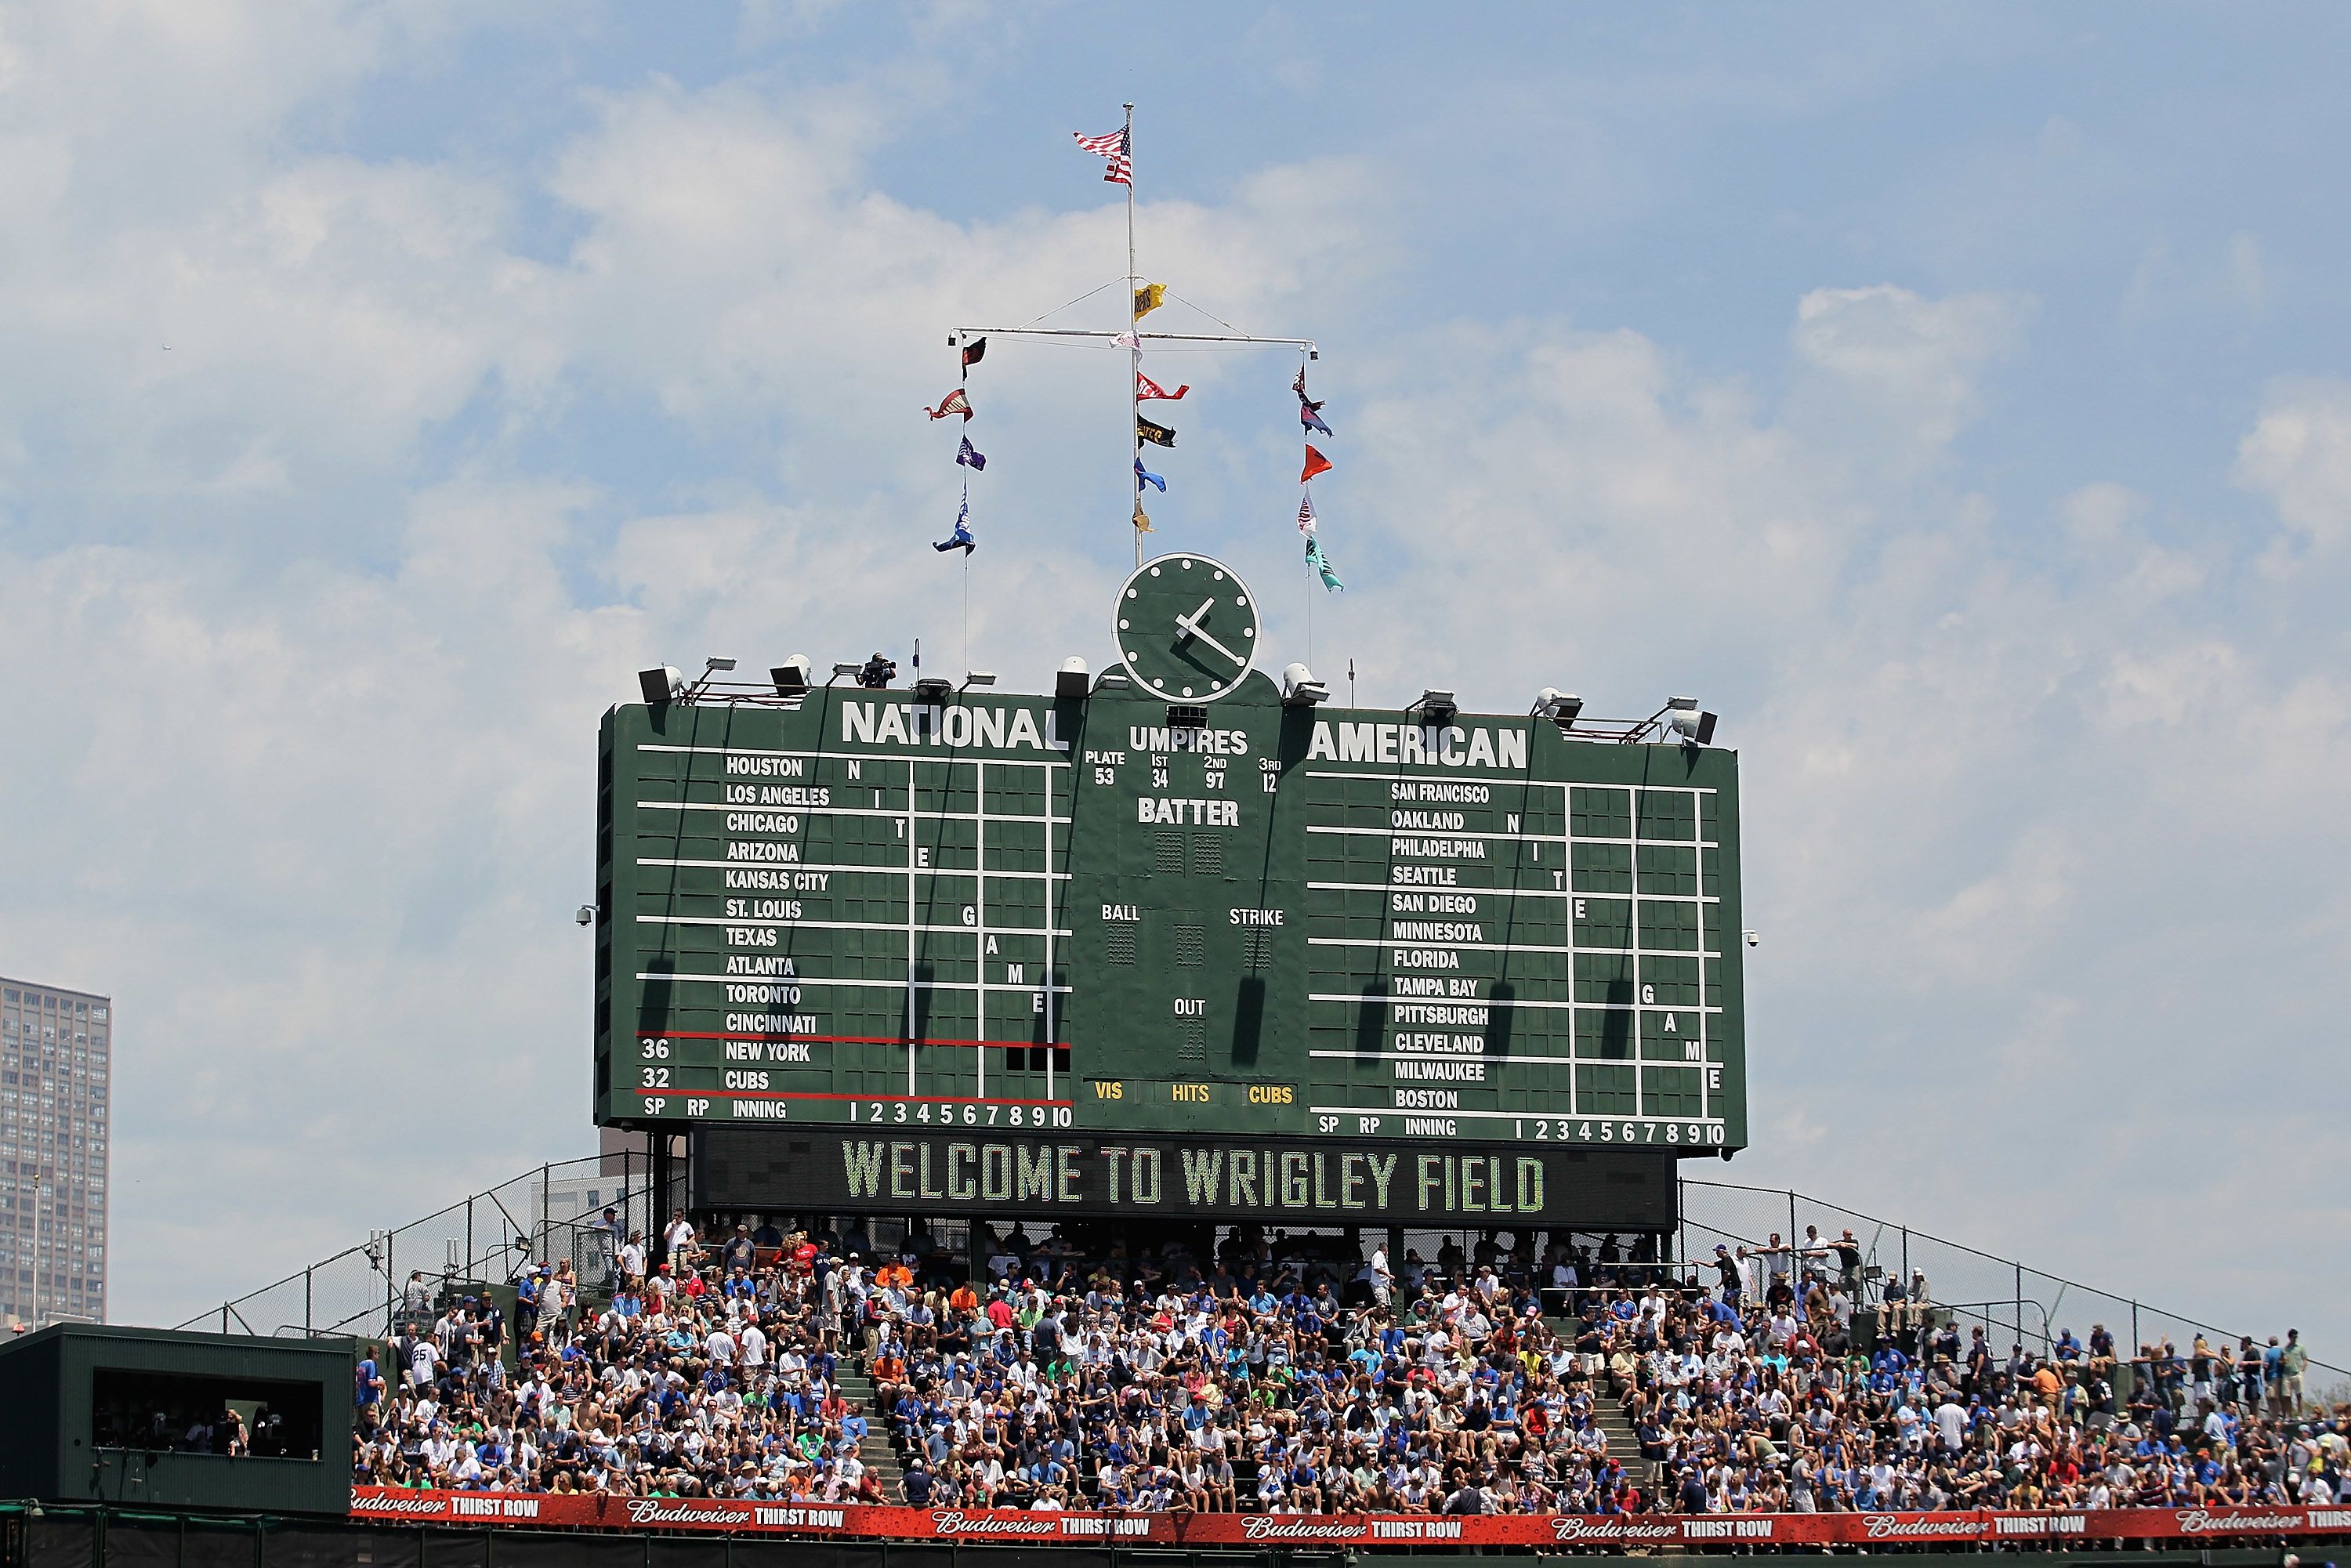 In video board space race, Cubs near bottom, White Sox near top (compare  all 30 teams)